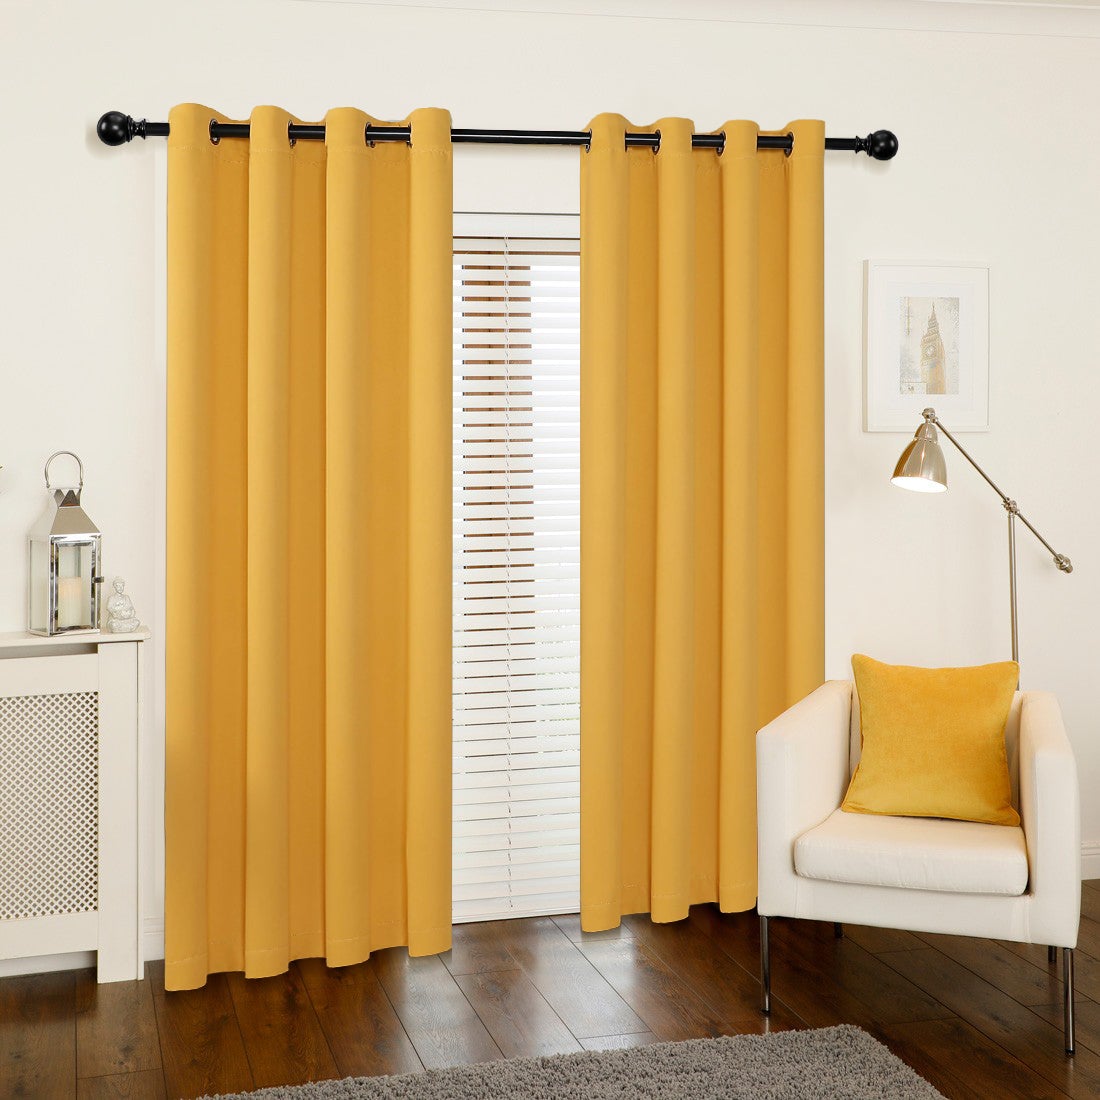 Akarise Blackout Curtains for Bedroom Living Room - 2 Panels, Yellow